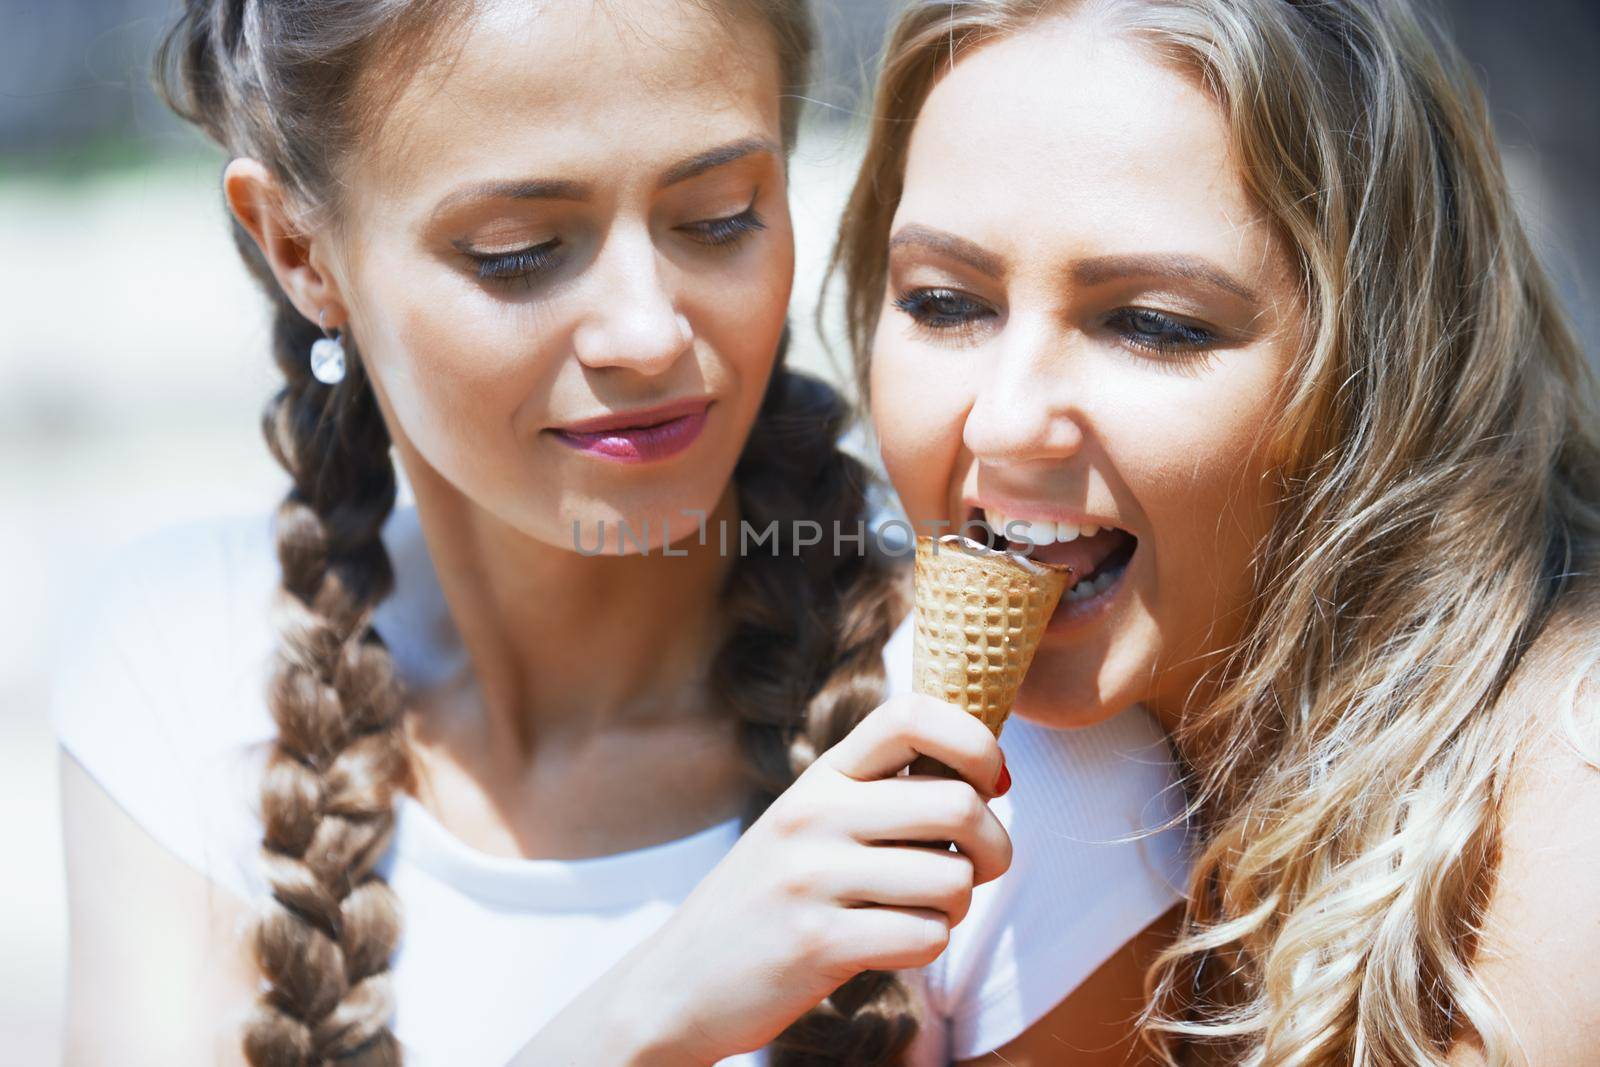 Girlfriends having fun together and eating ice cream by Novic